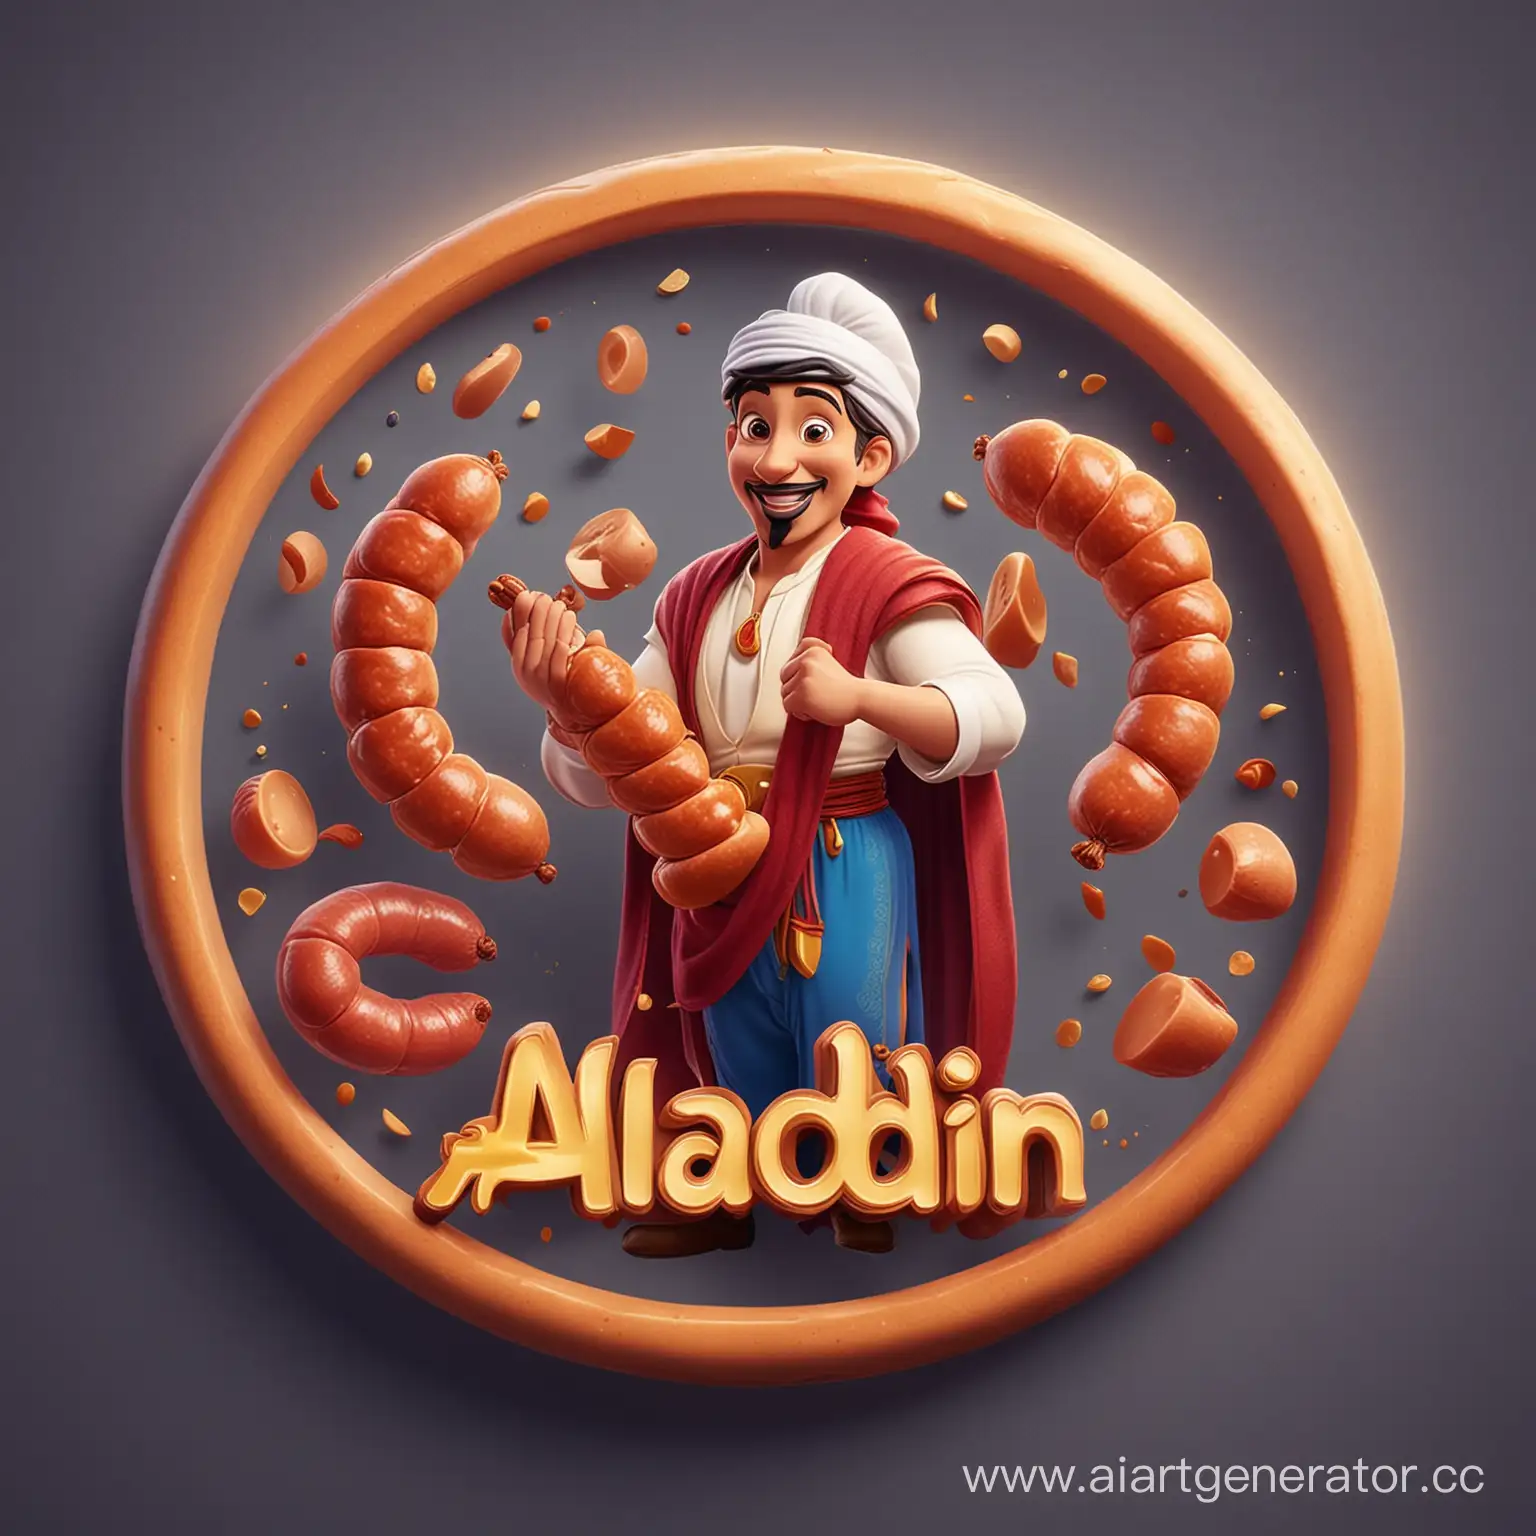 logo aladdin character holding saussage in 3d circle shape logo, meat and soussages peaces incorporated, light emitting, optimistic